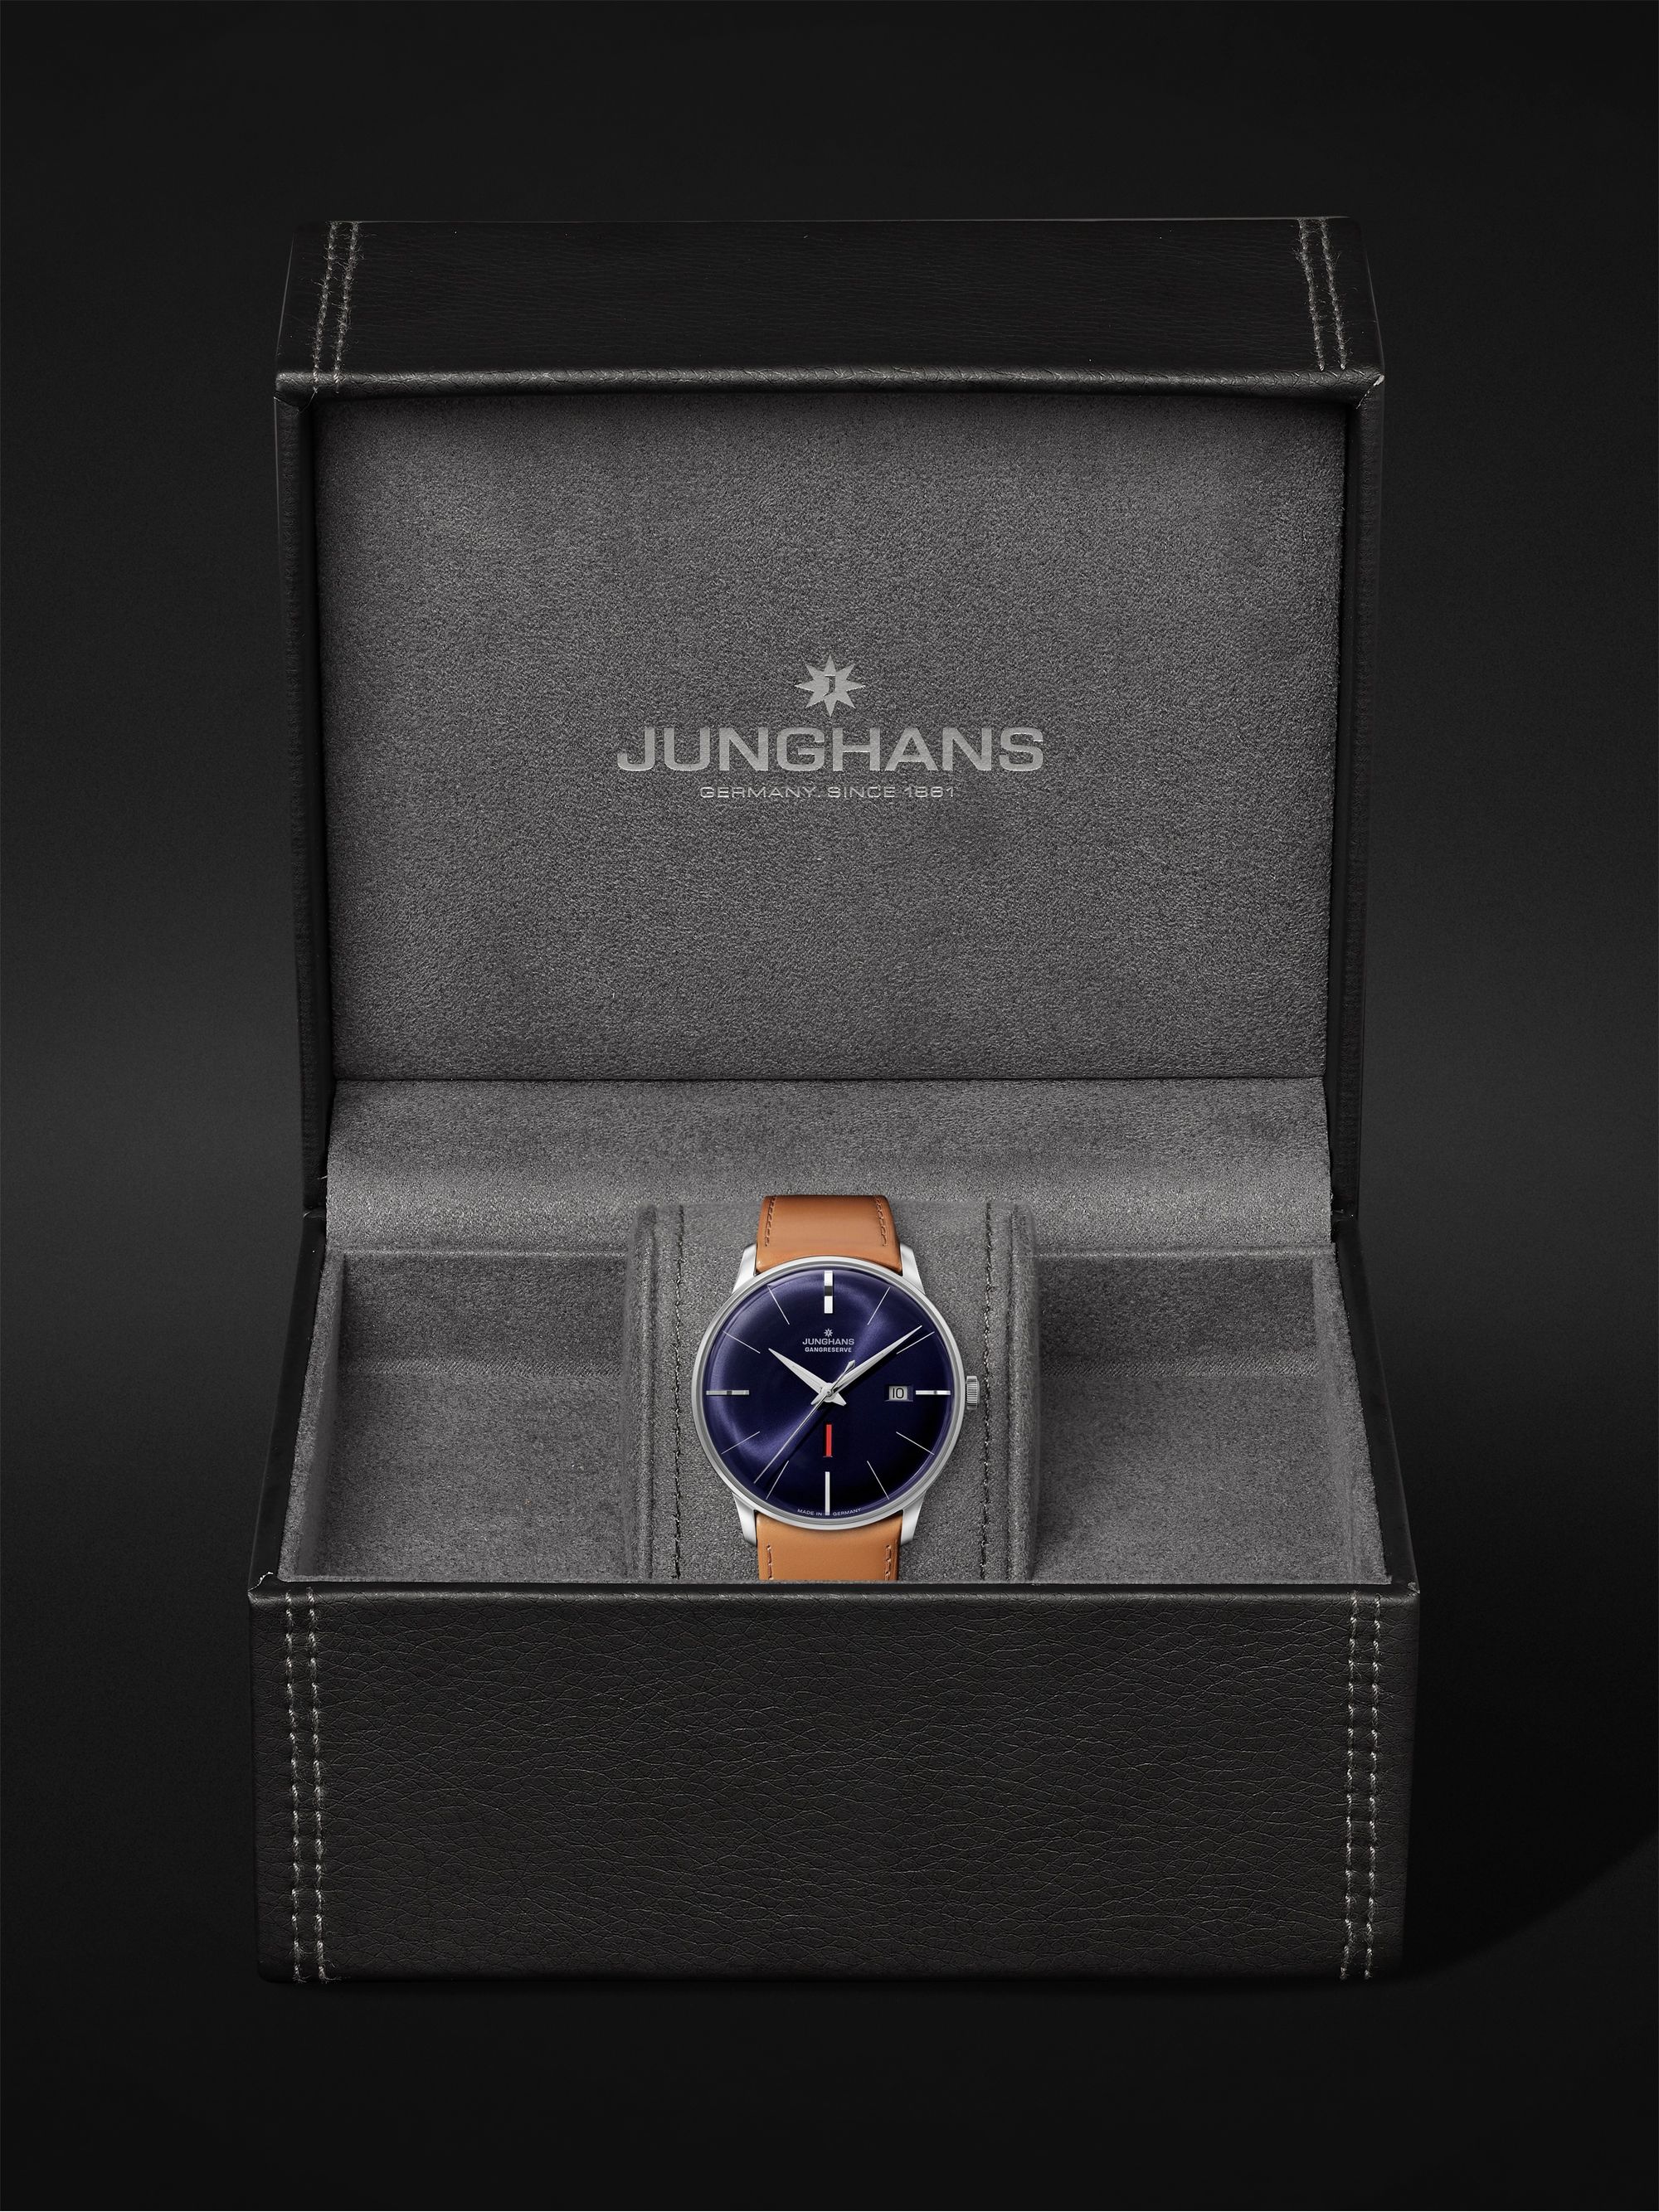 JUNGHANS Meister Gangreserve 160 Limited Edition Automatic 40.4mm Stainless Steel and Leather Watch, Ref. No. 27/4114.02